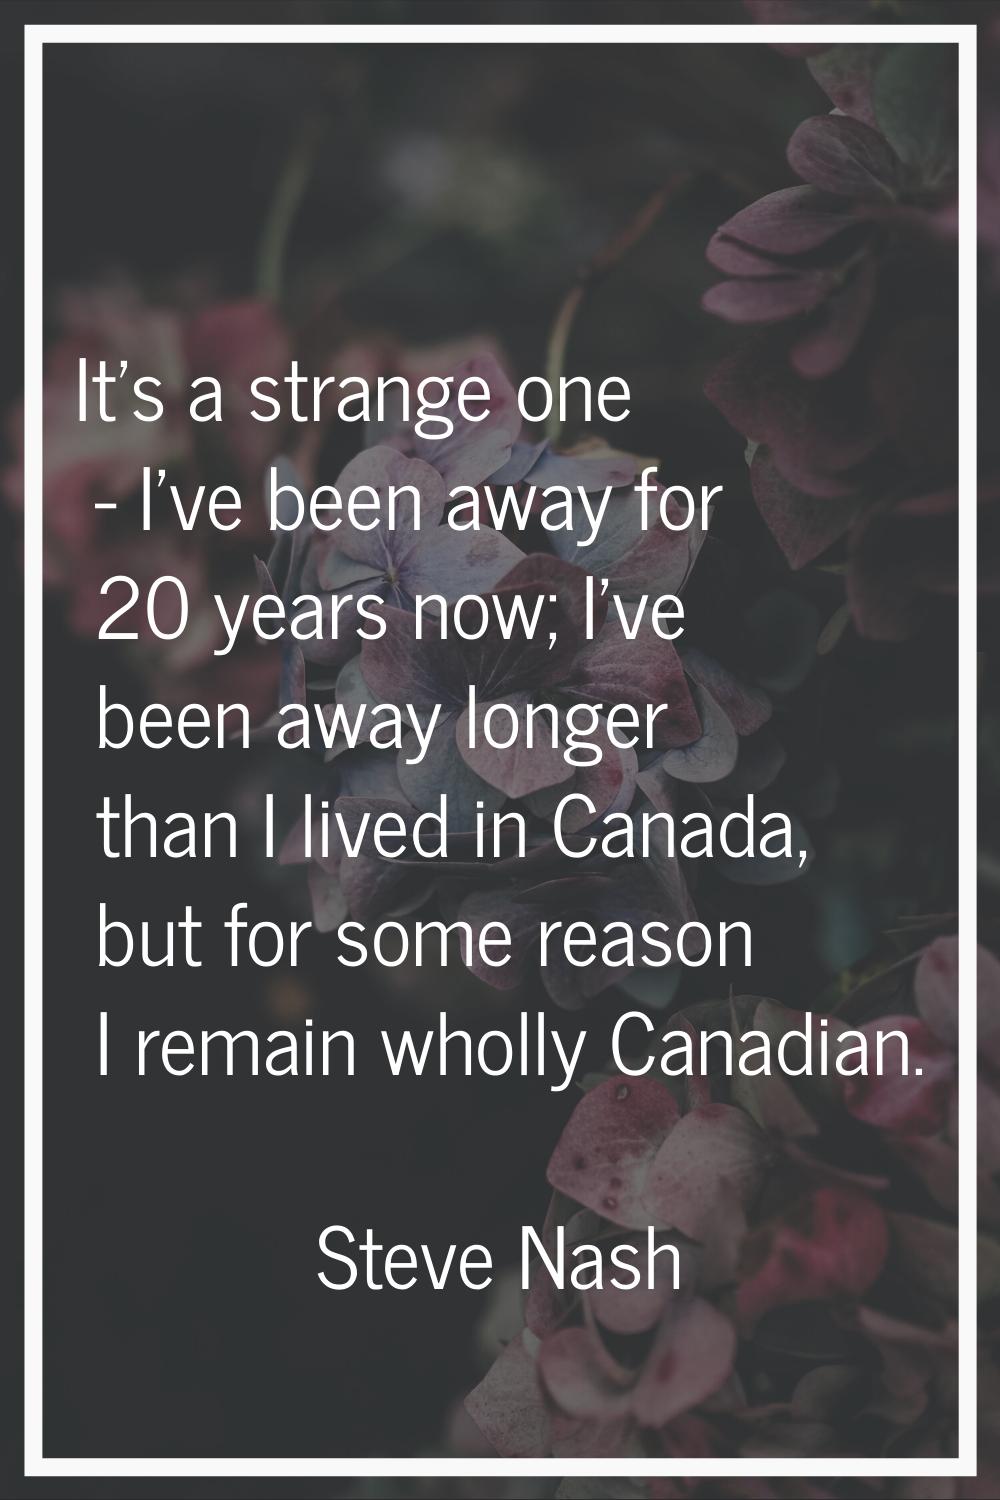 It's a strange one - I've been away for 20 years now; I've been away longer than I lived in Canada,